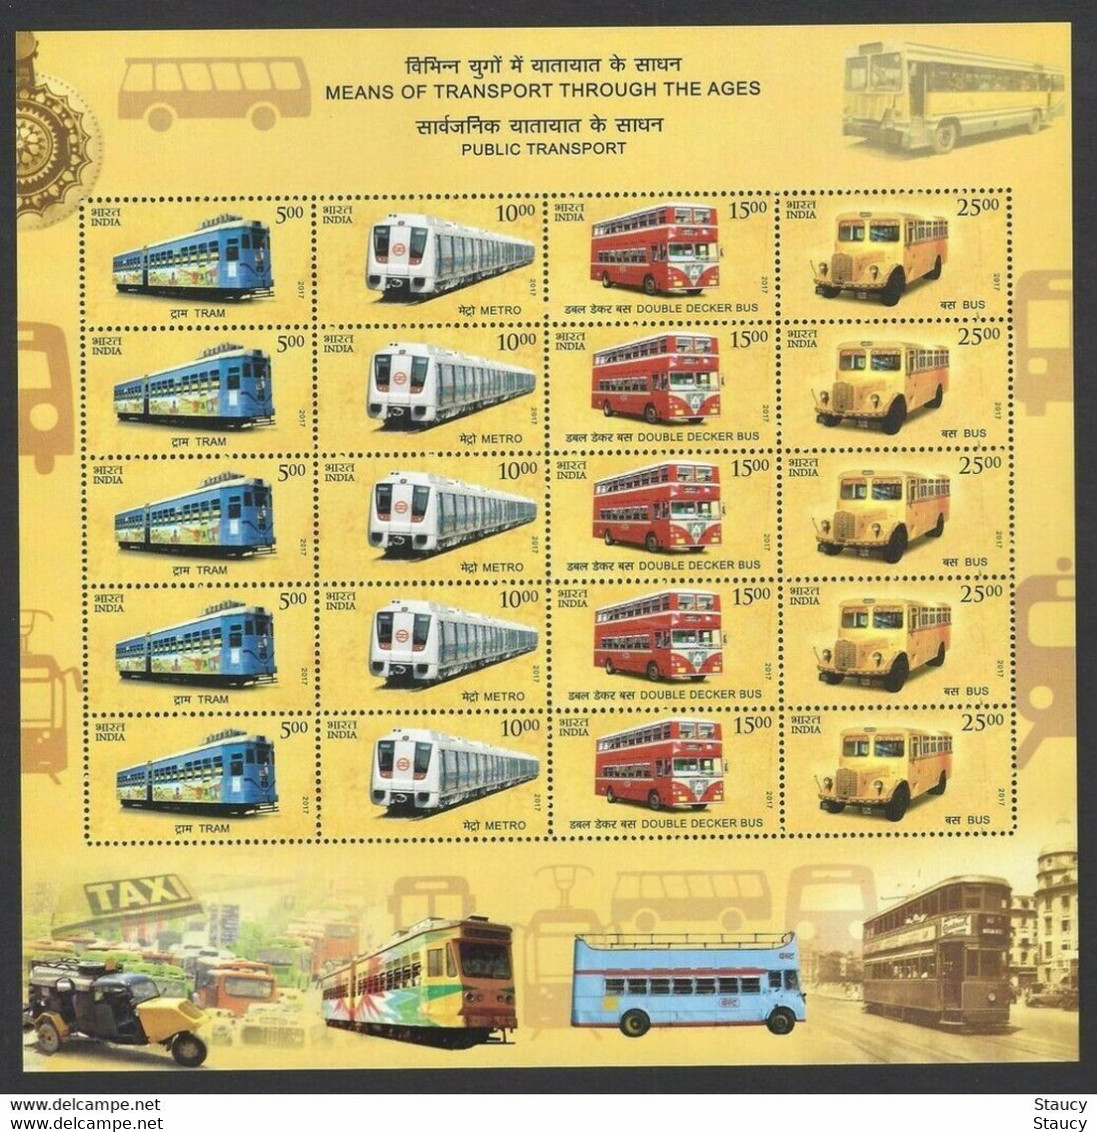 India 2017 Means of Transport Through Ages Complete set of 6 full sheetlets (5 different + 1 all stamps Mix sheet) MNH